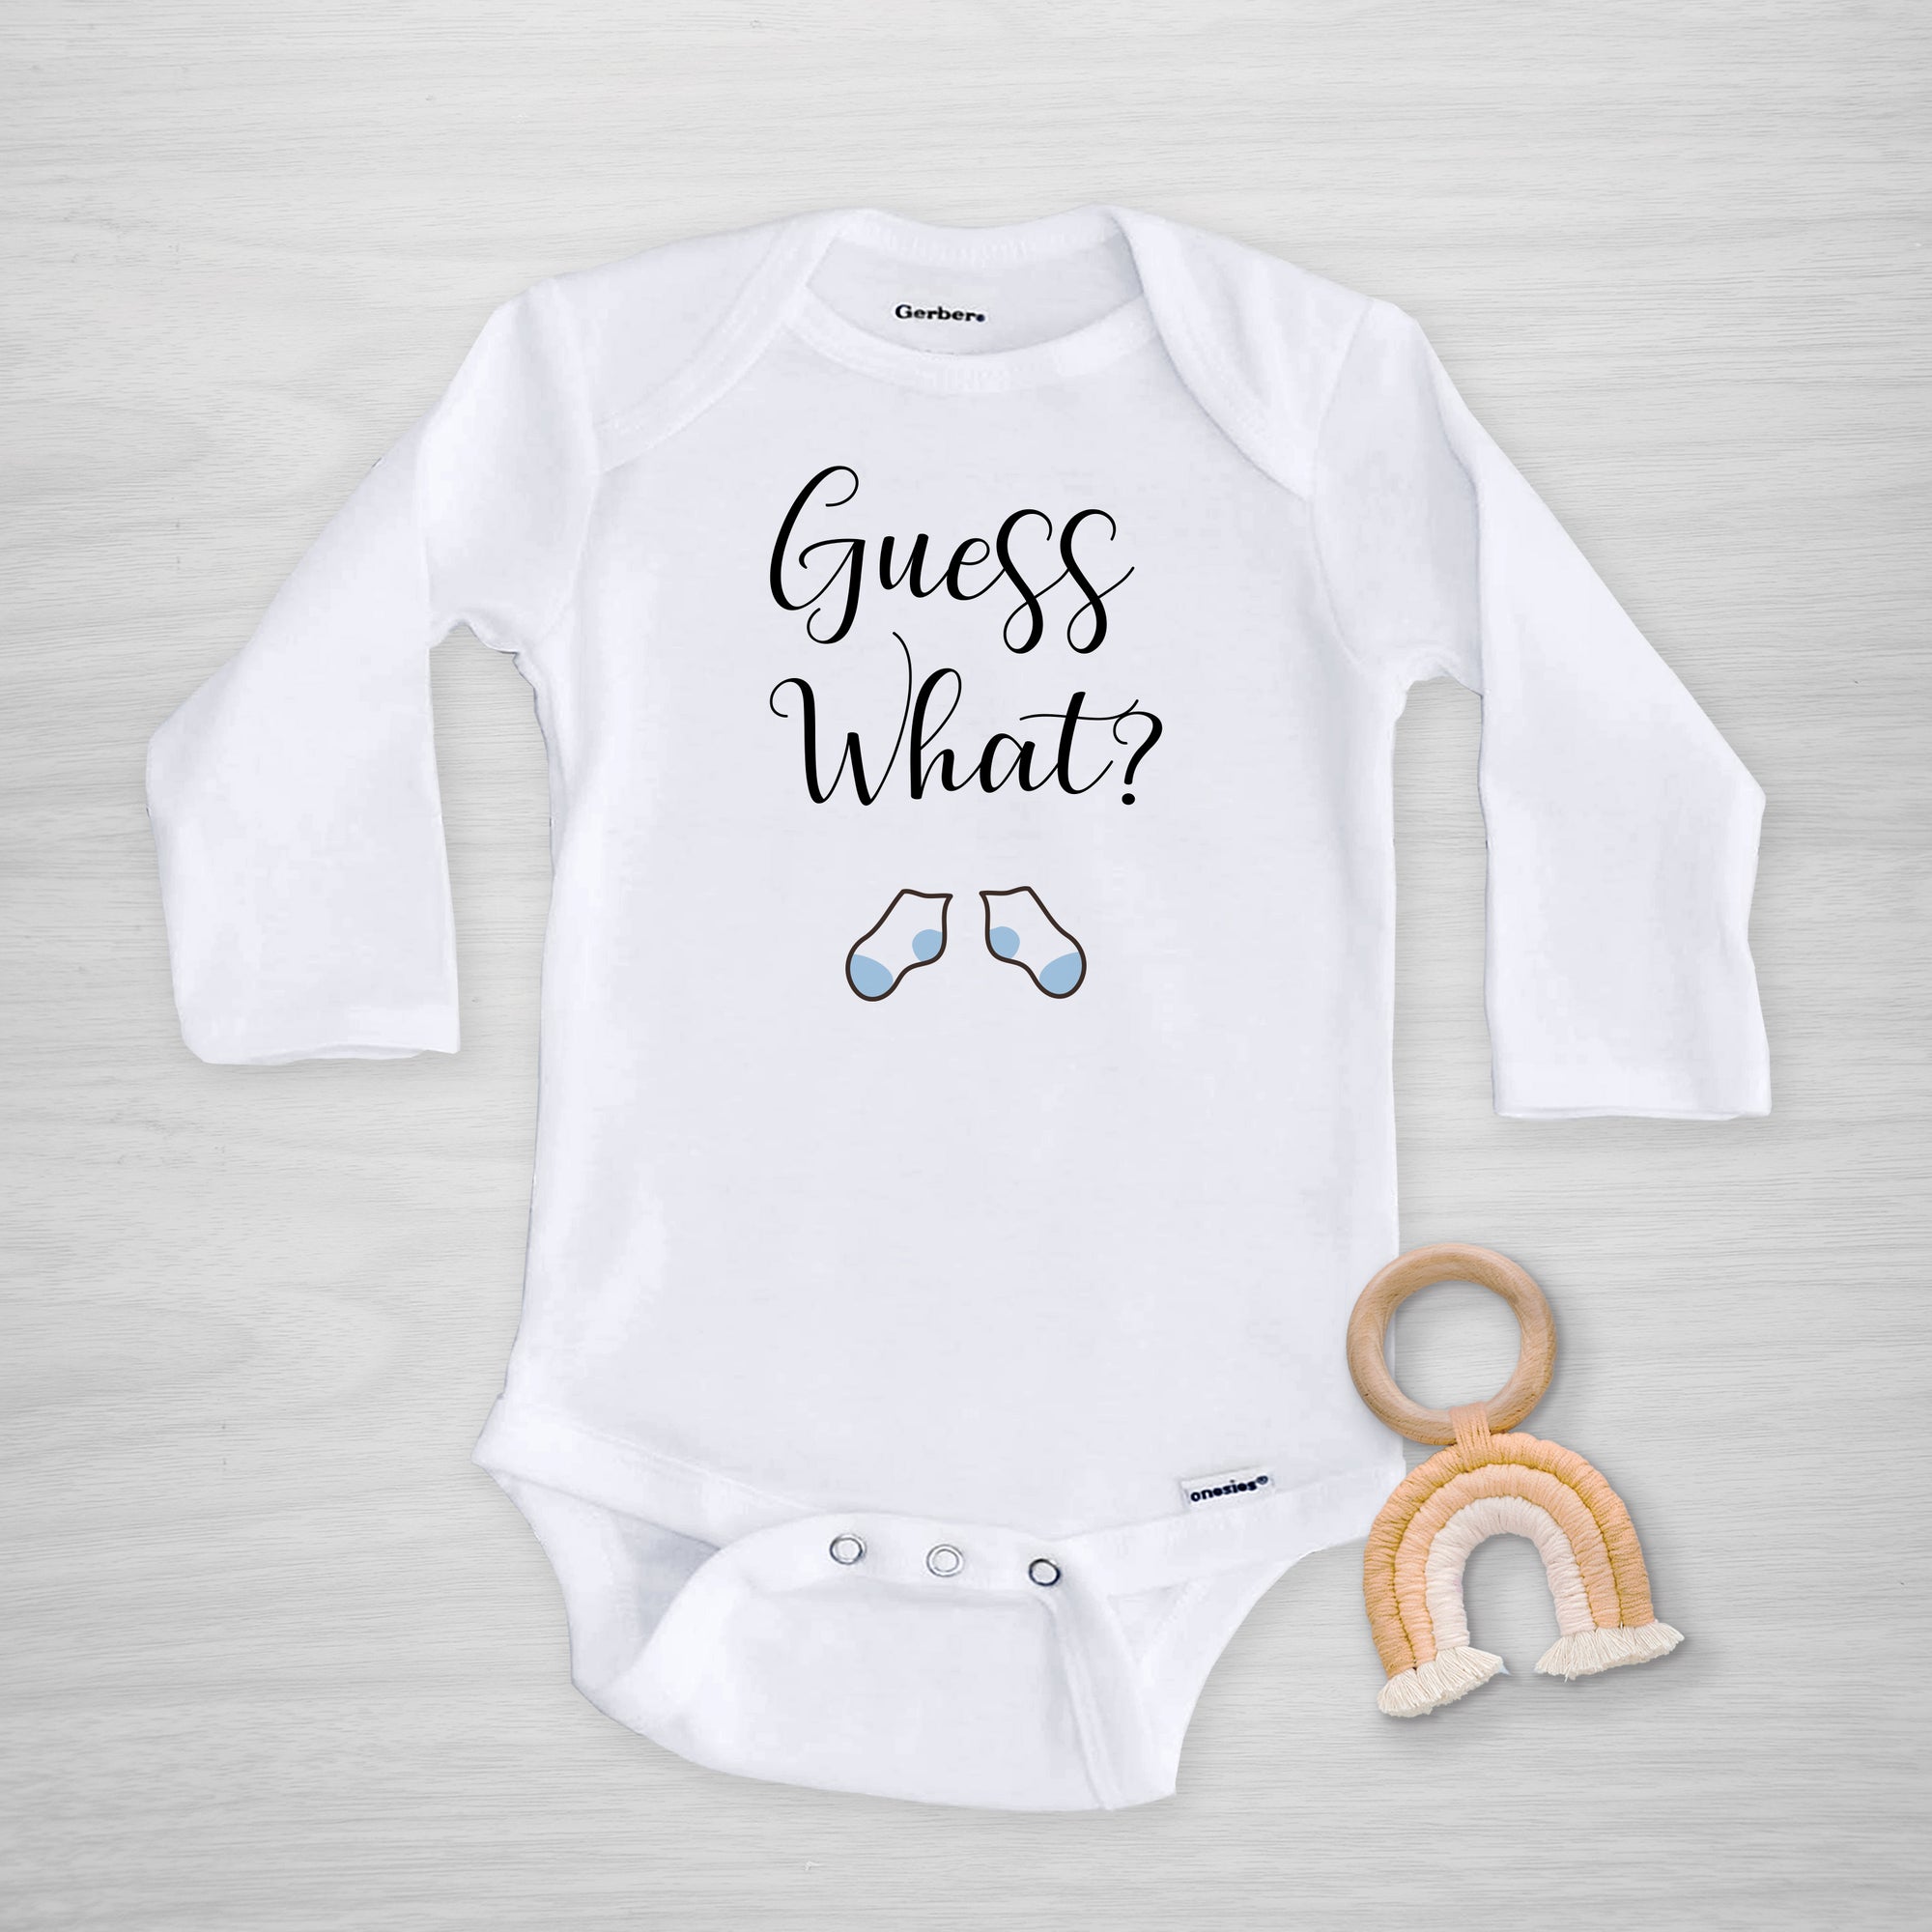 Guess What Pregnancy Announcement Gerber Onesie with blue socks, Pipsy.com, long sleeved